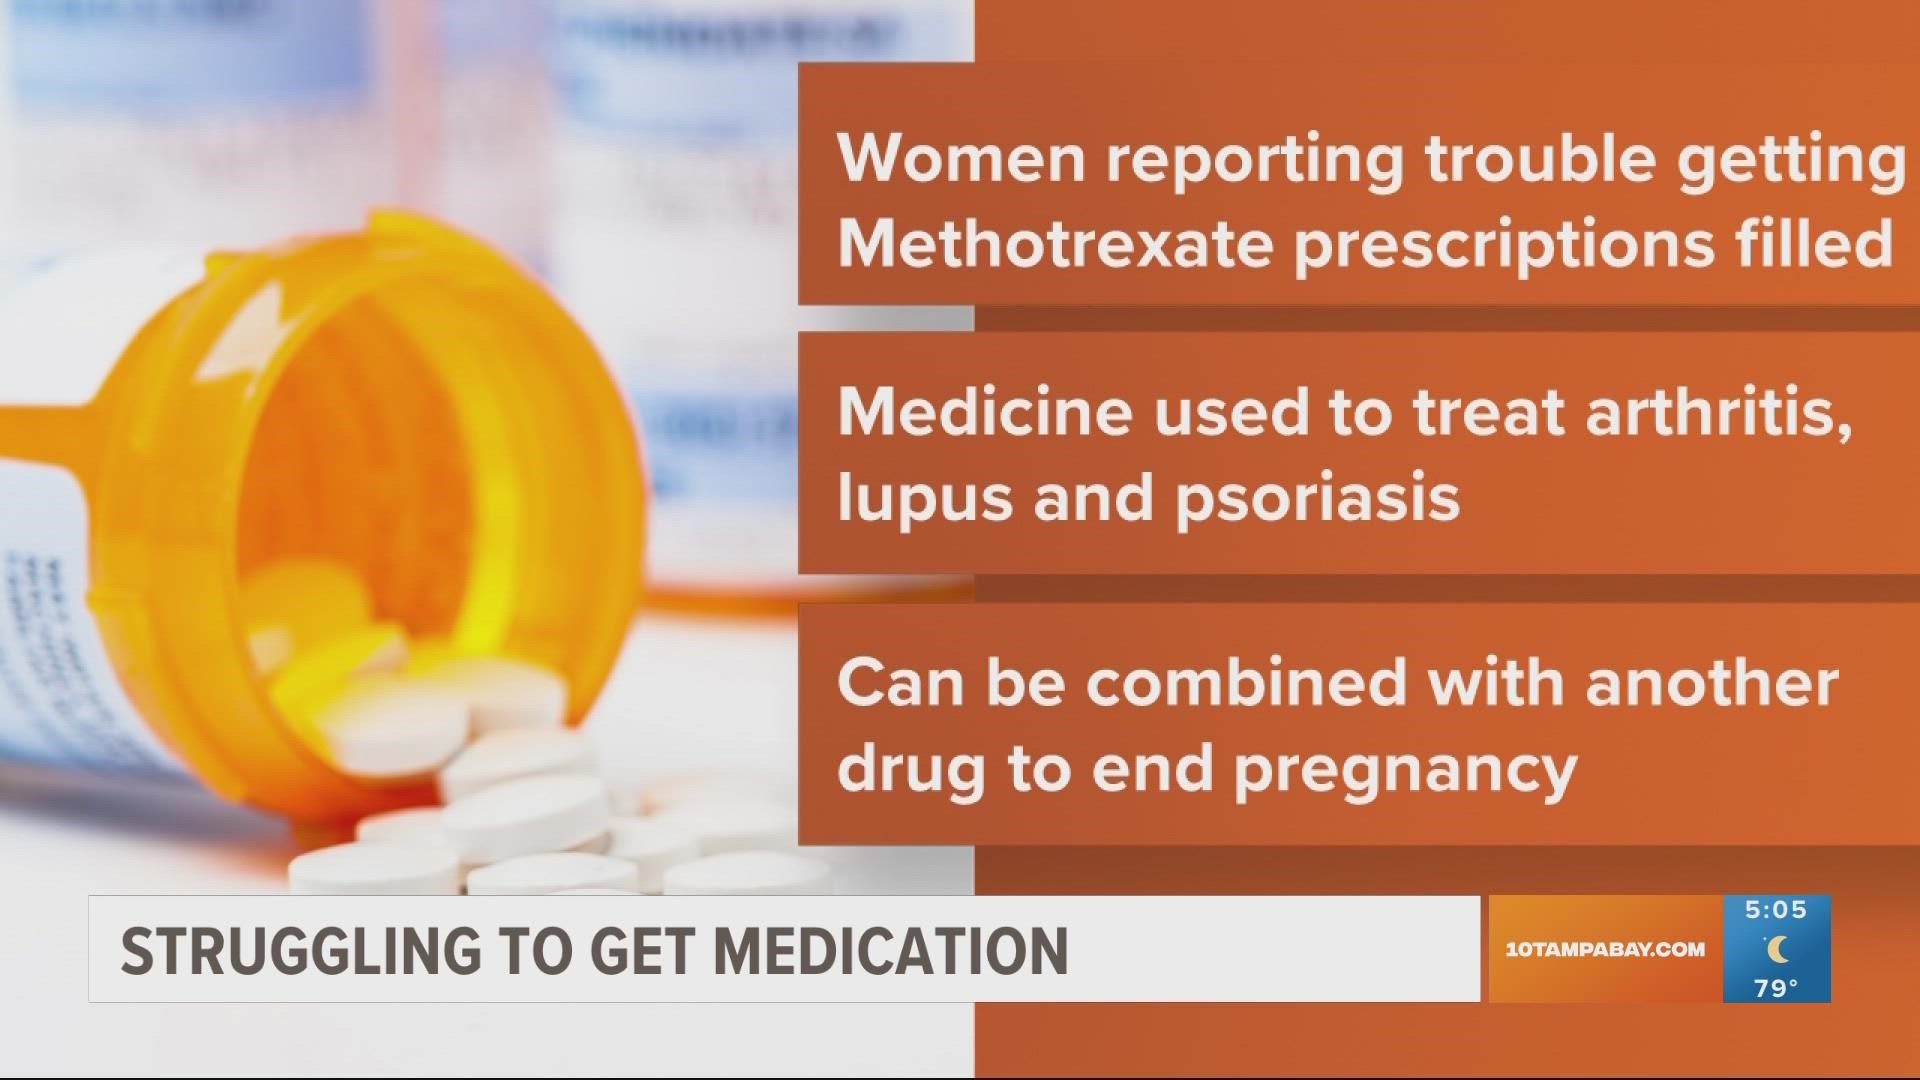 Anyone experiencing difficulty getting their prescriptions filled can report the issue to multiple organizations.